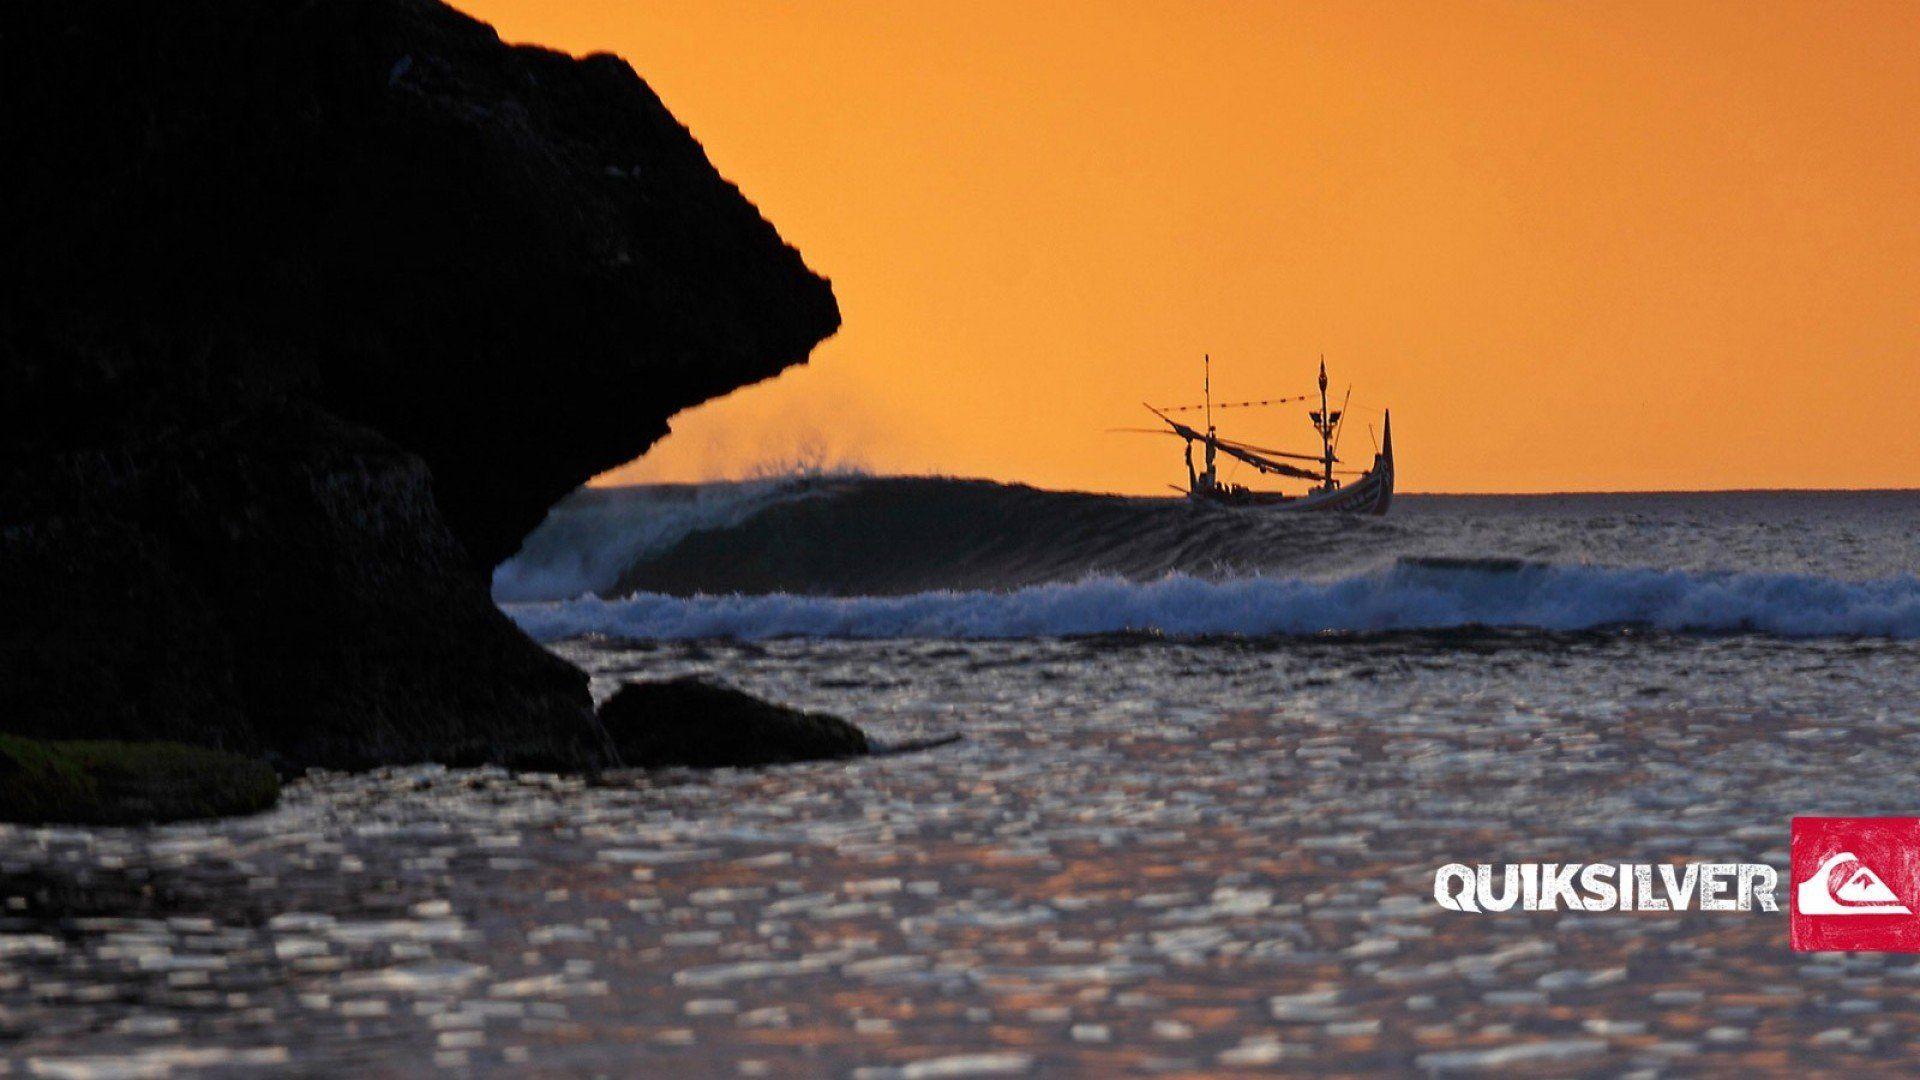 stocks at Quiksilver Wallpaper group